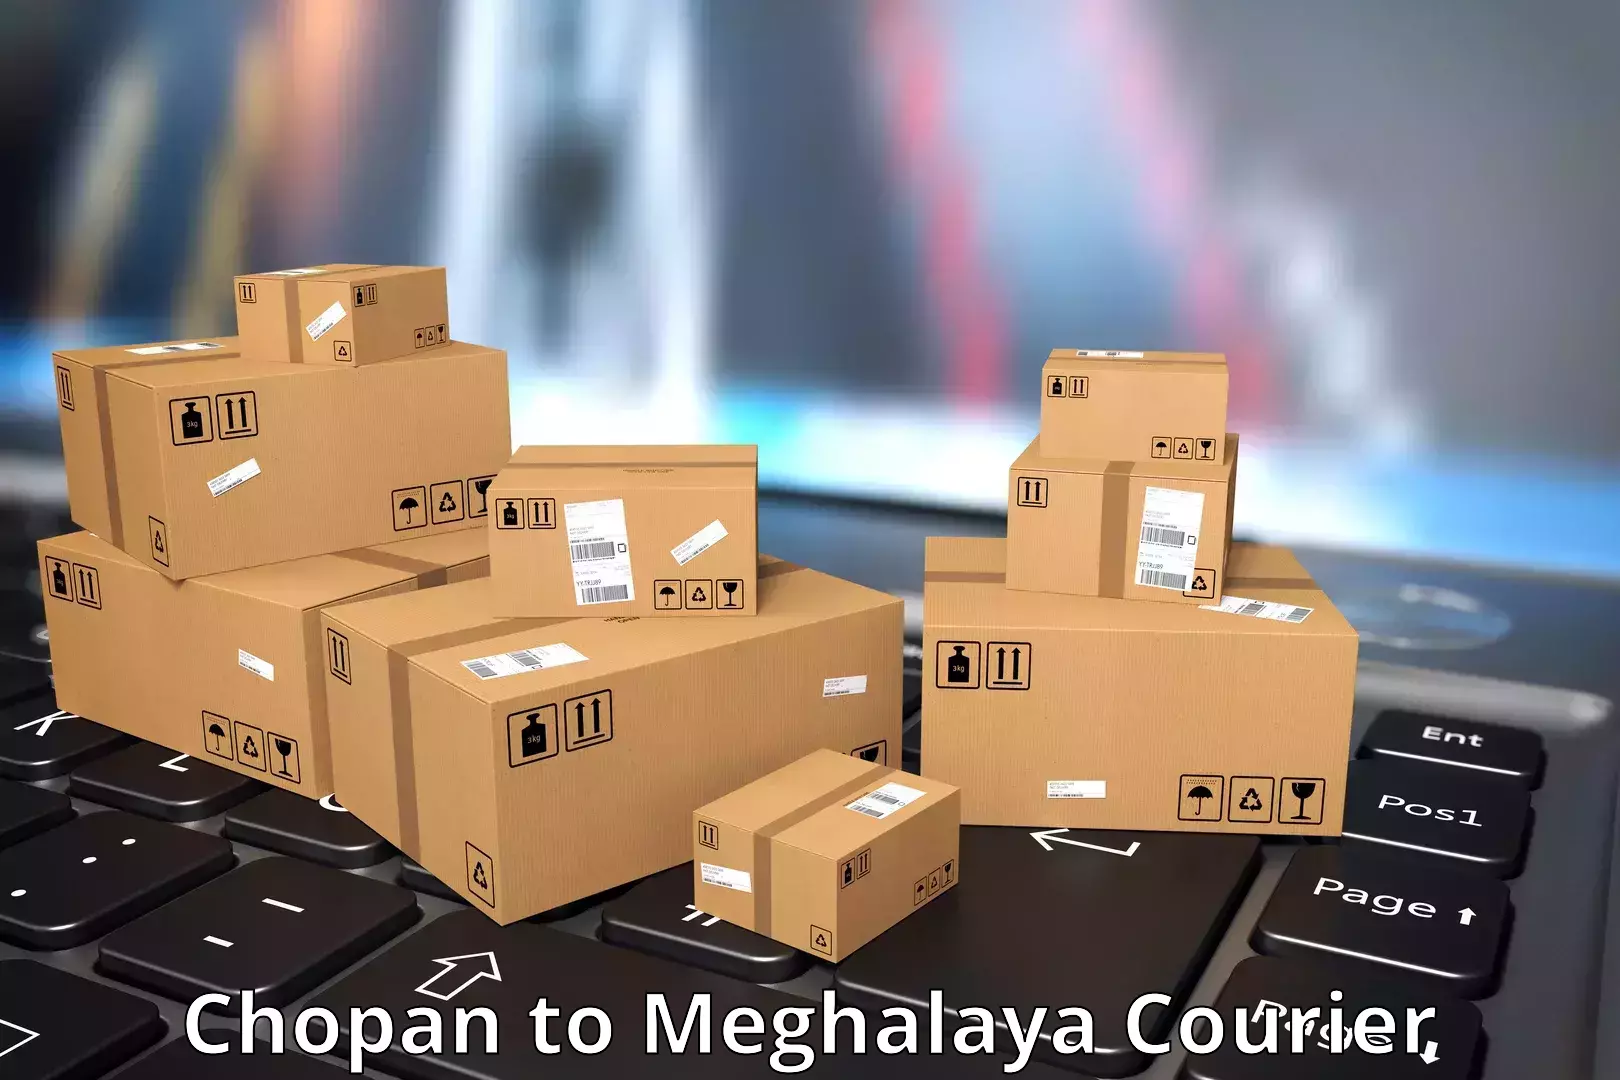 Efficient package consolidation Chopan to Meghalaya